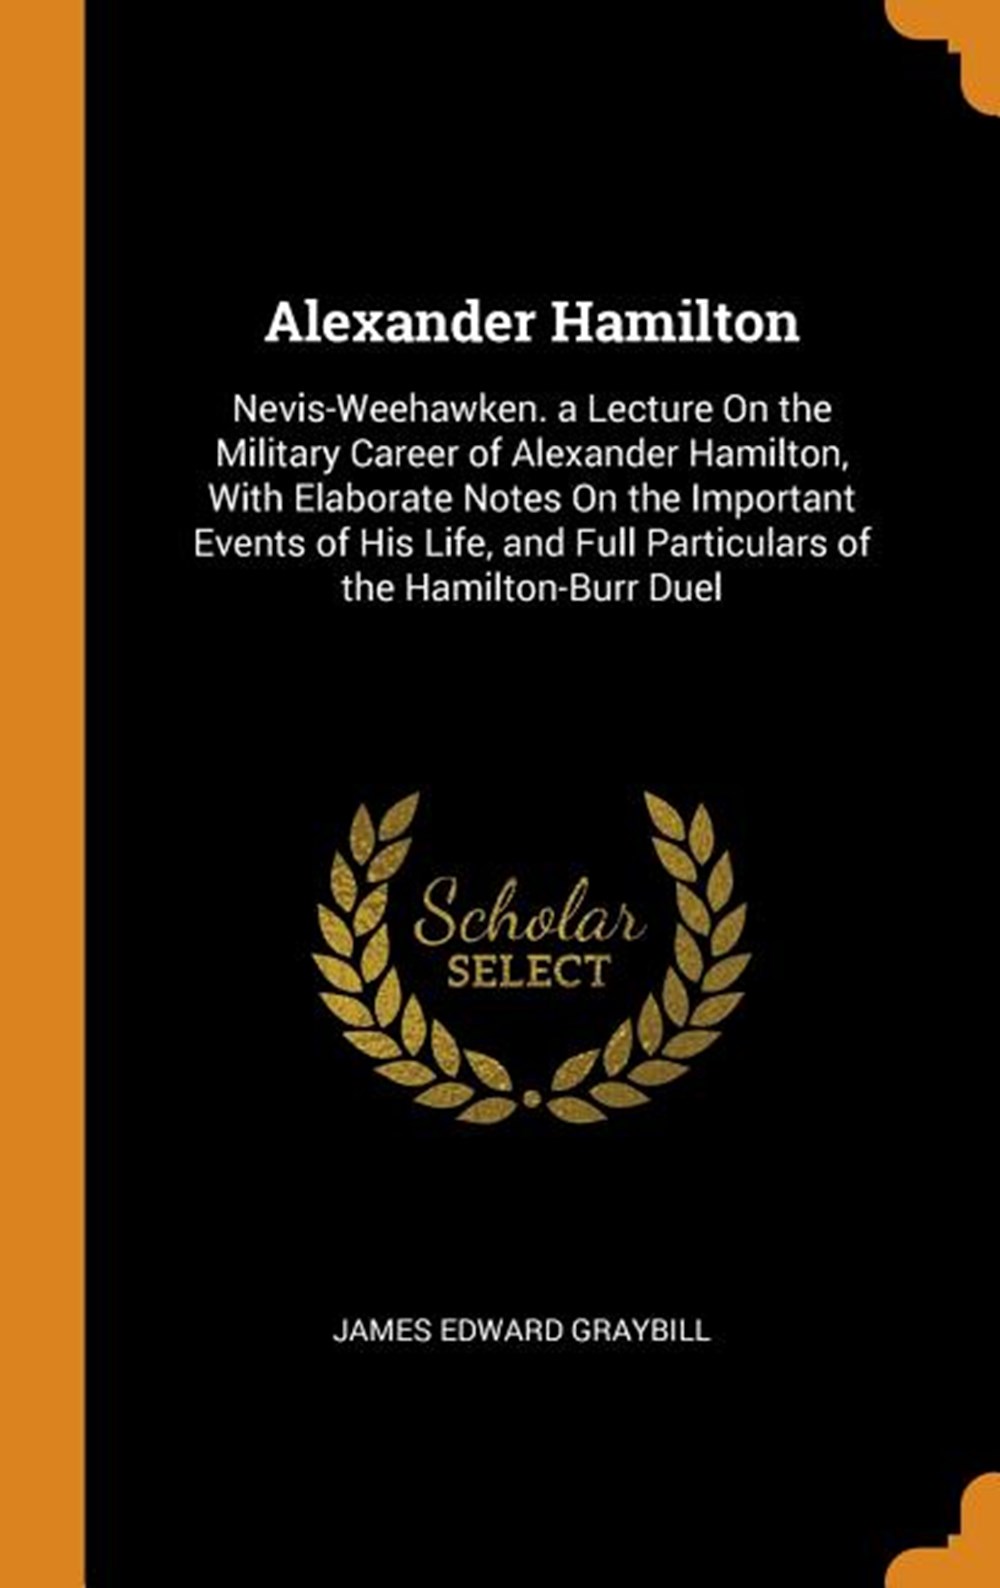 Alexander Hamilton: Nevis-Weehawken. a Lecture on the Military Career of Alexander Hamilton, with El